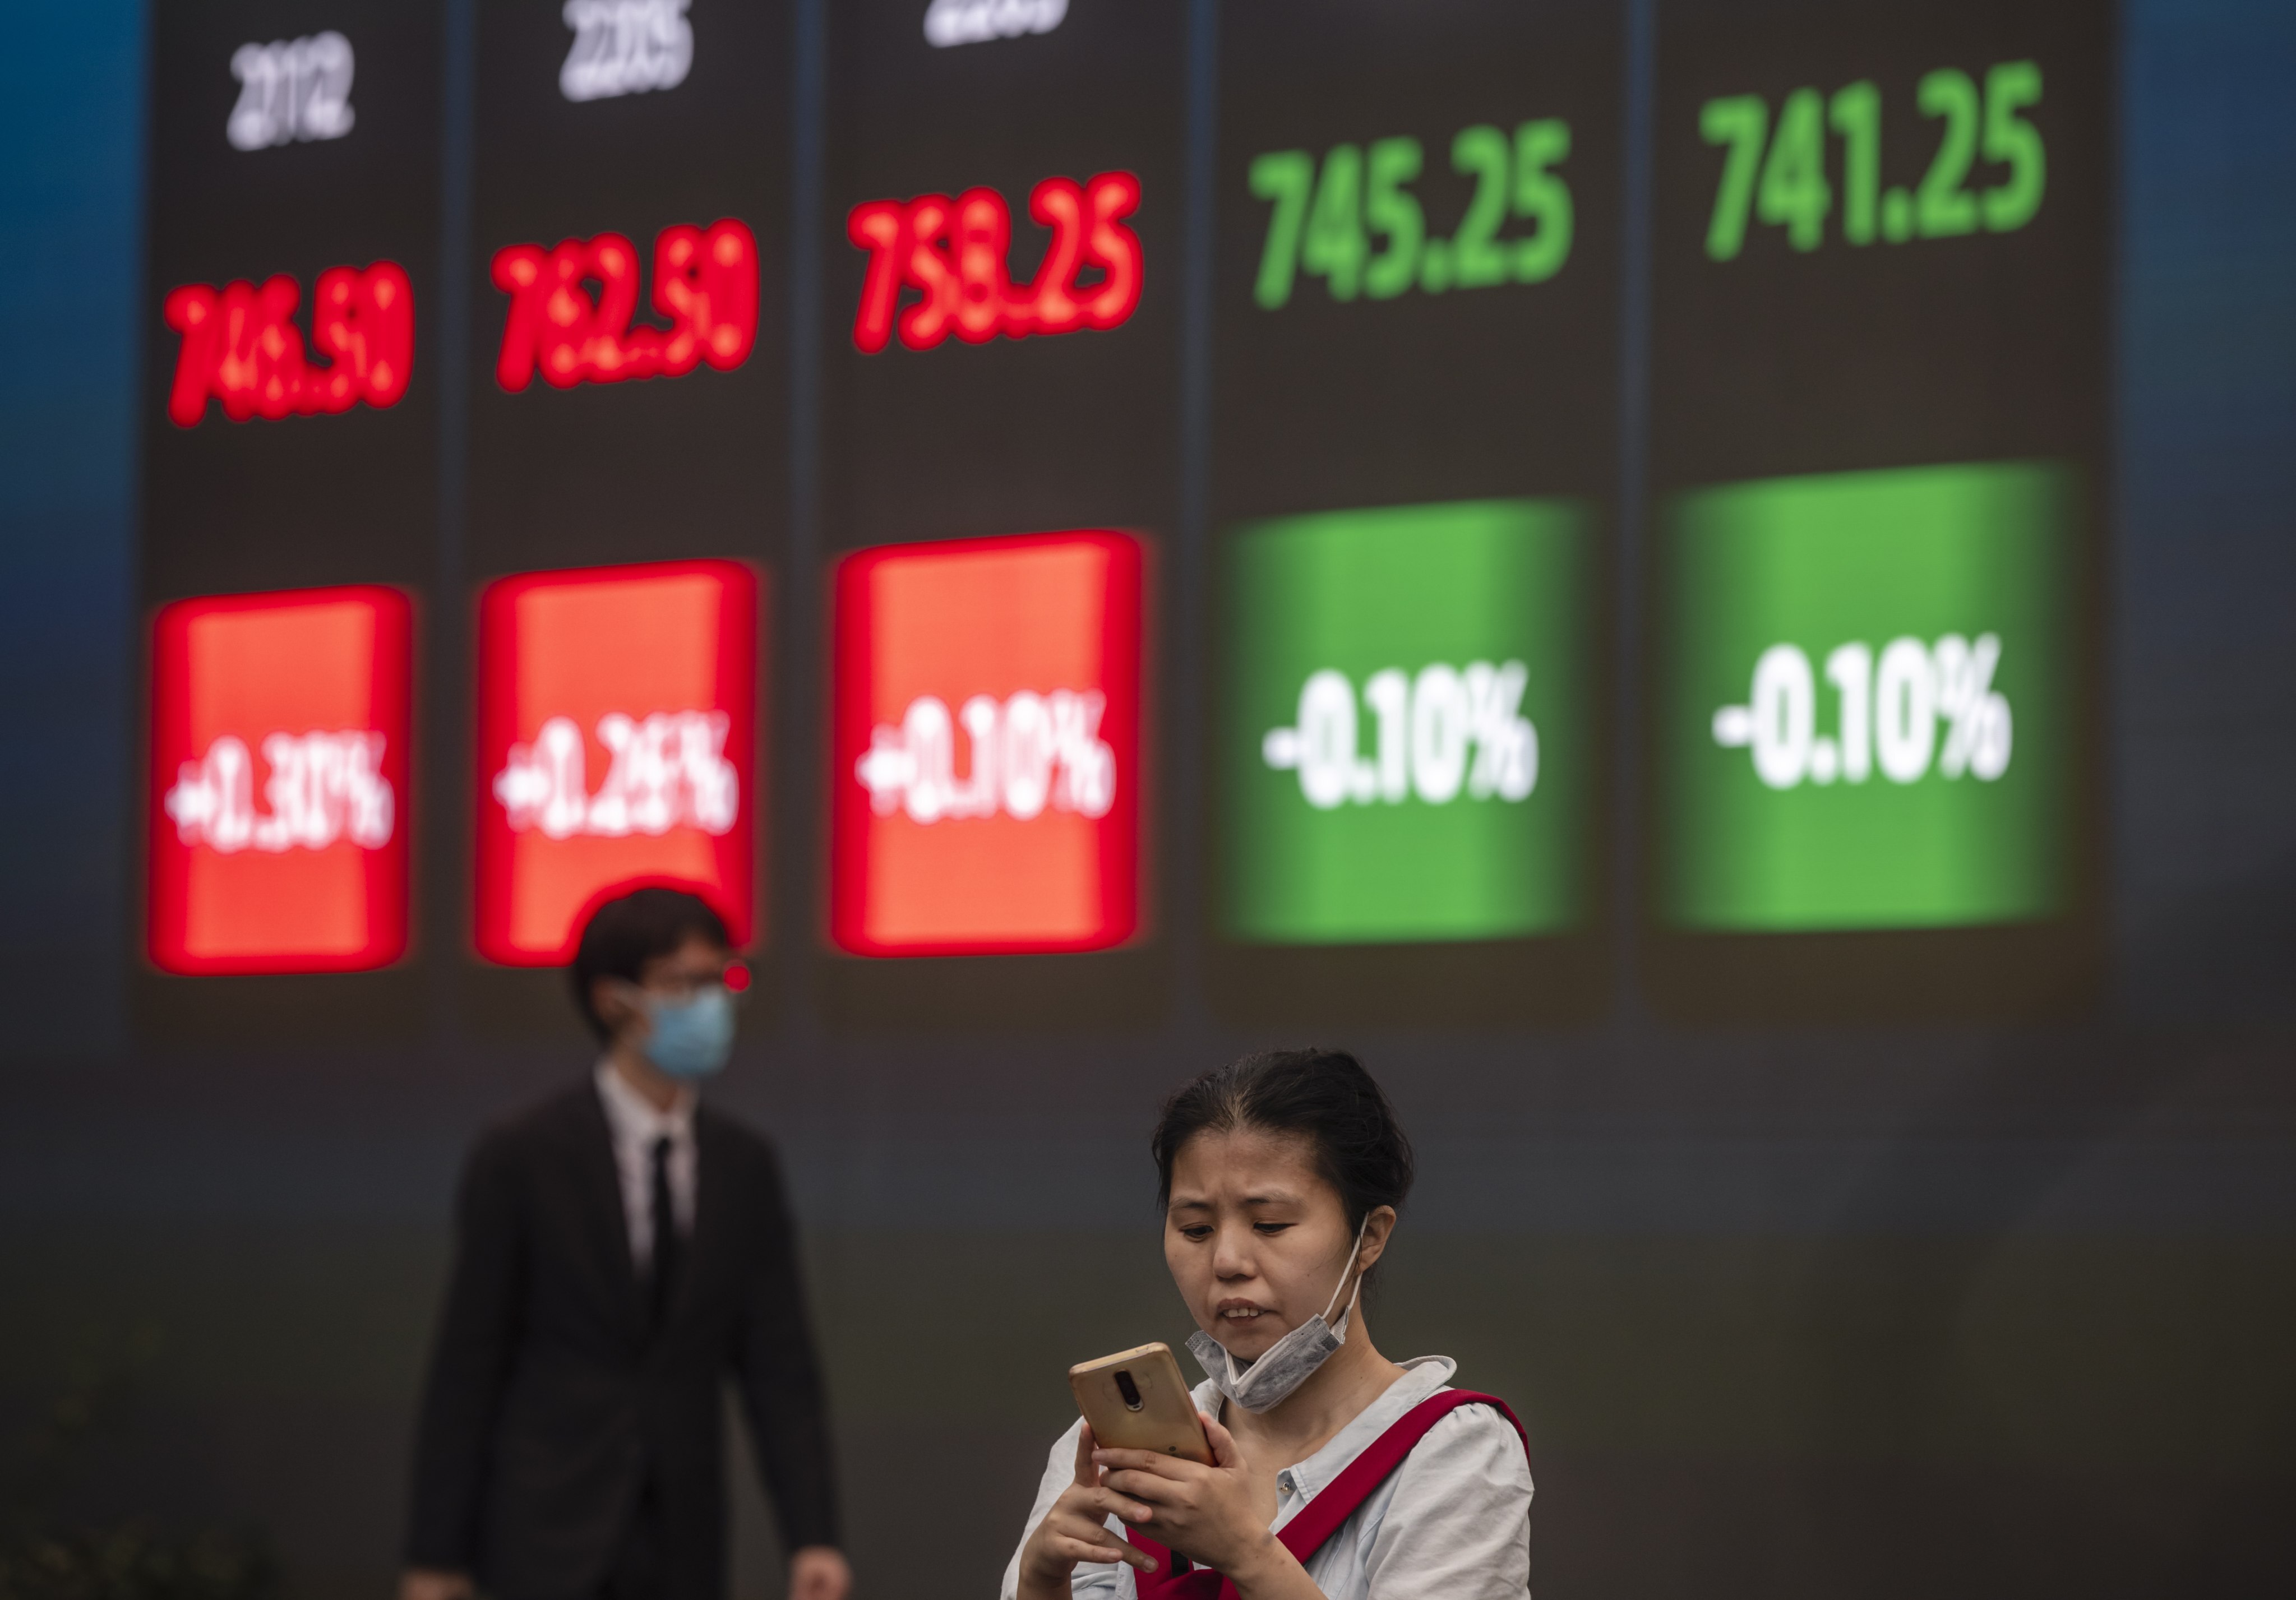 A woman stands in front of a screen showing stock exchange and economic data in Shanghai, on October 7. Photo: EPA-EFE